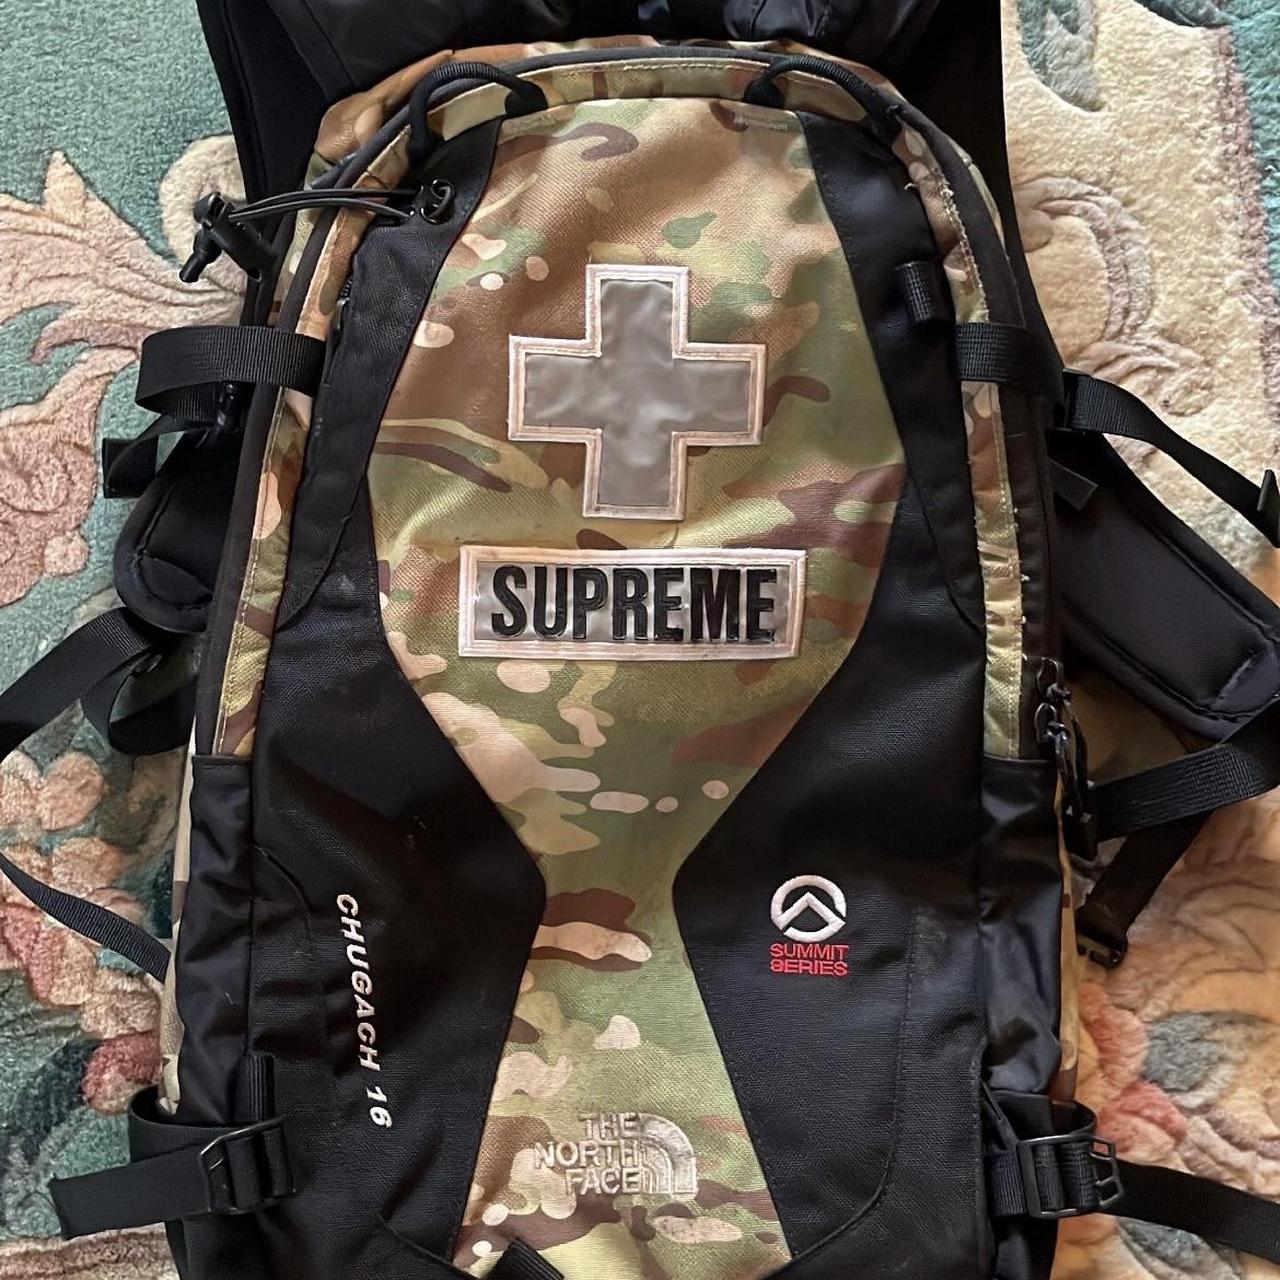 Supreme FW15 Backpack Good condition Located in - Depop